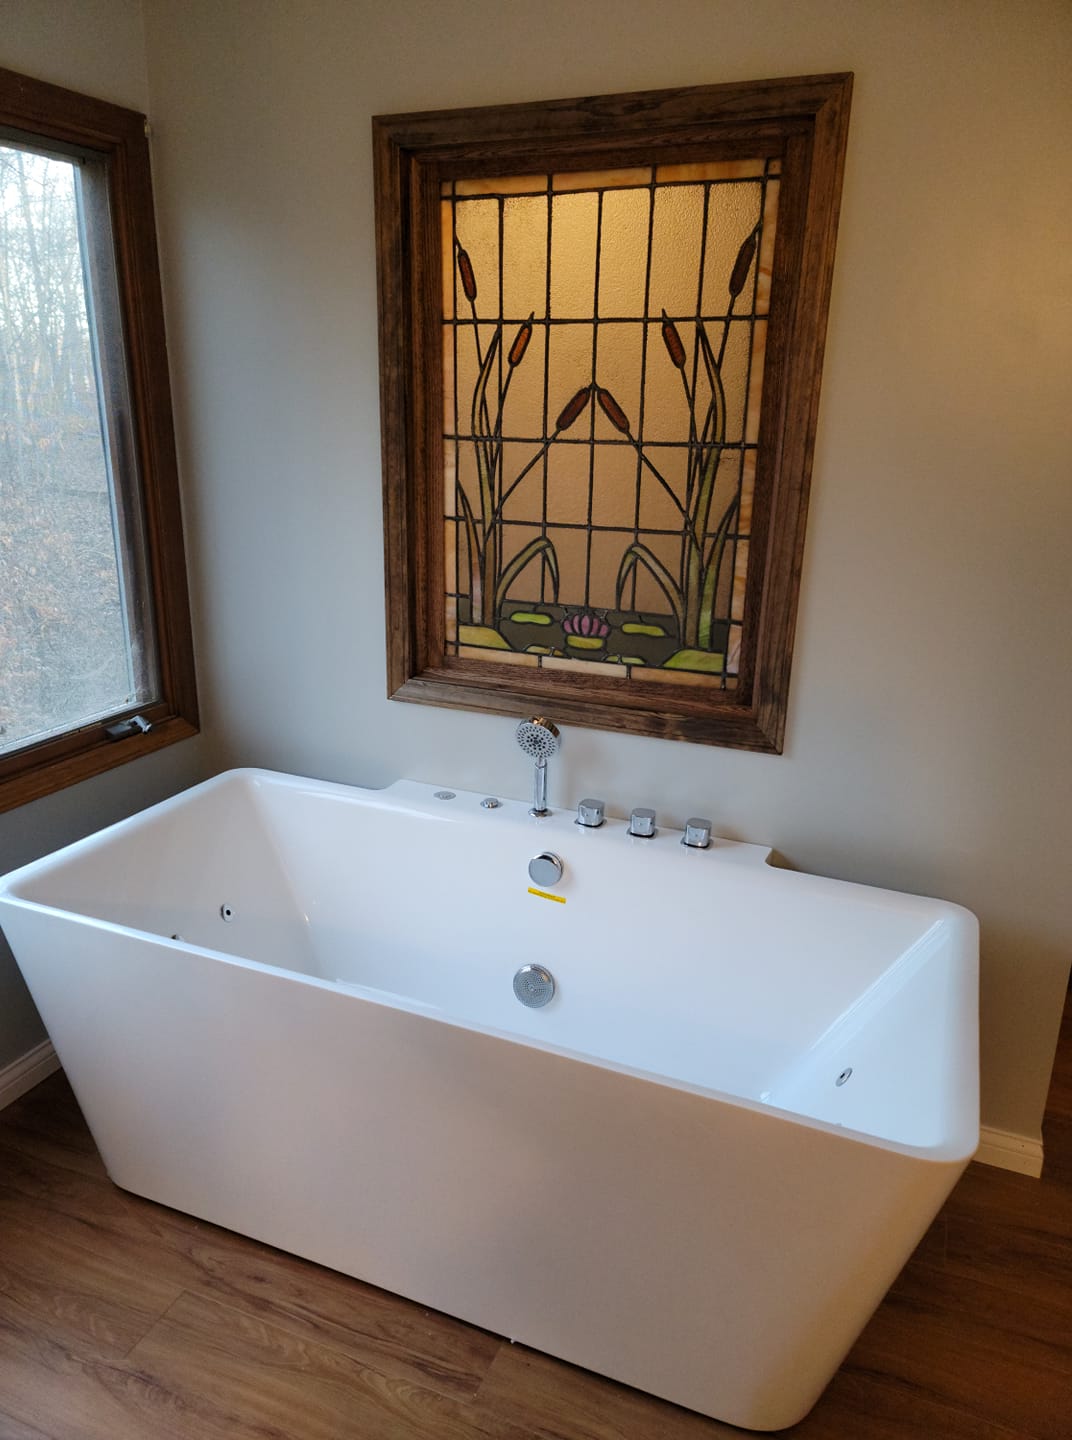 Do you need a licensed plumbing contractor to install your new tub? Hudson Plumbing is here for the Martinsville, Bedford, and Bloomington communities!